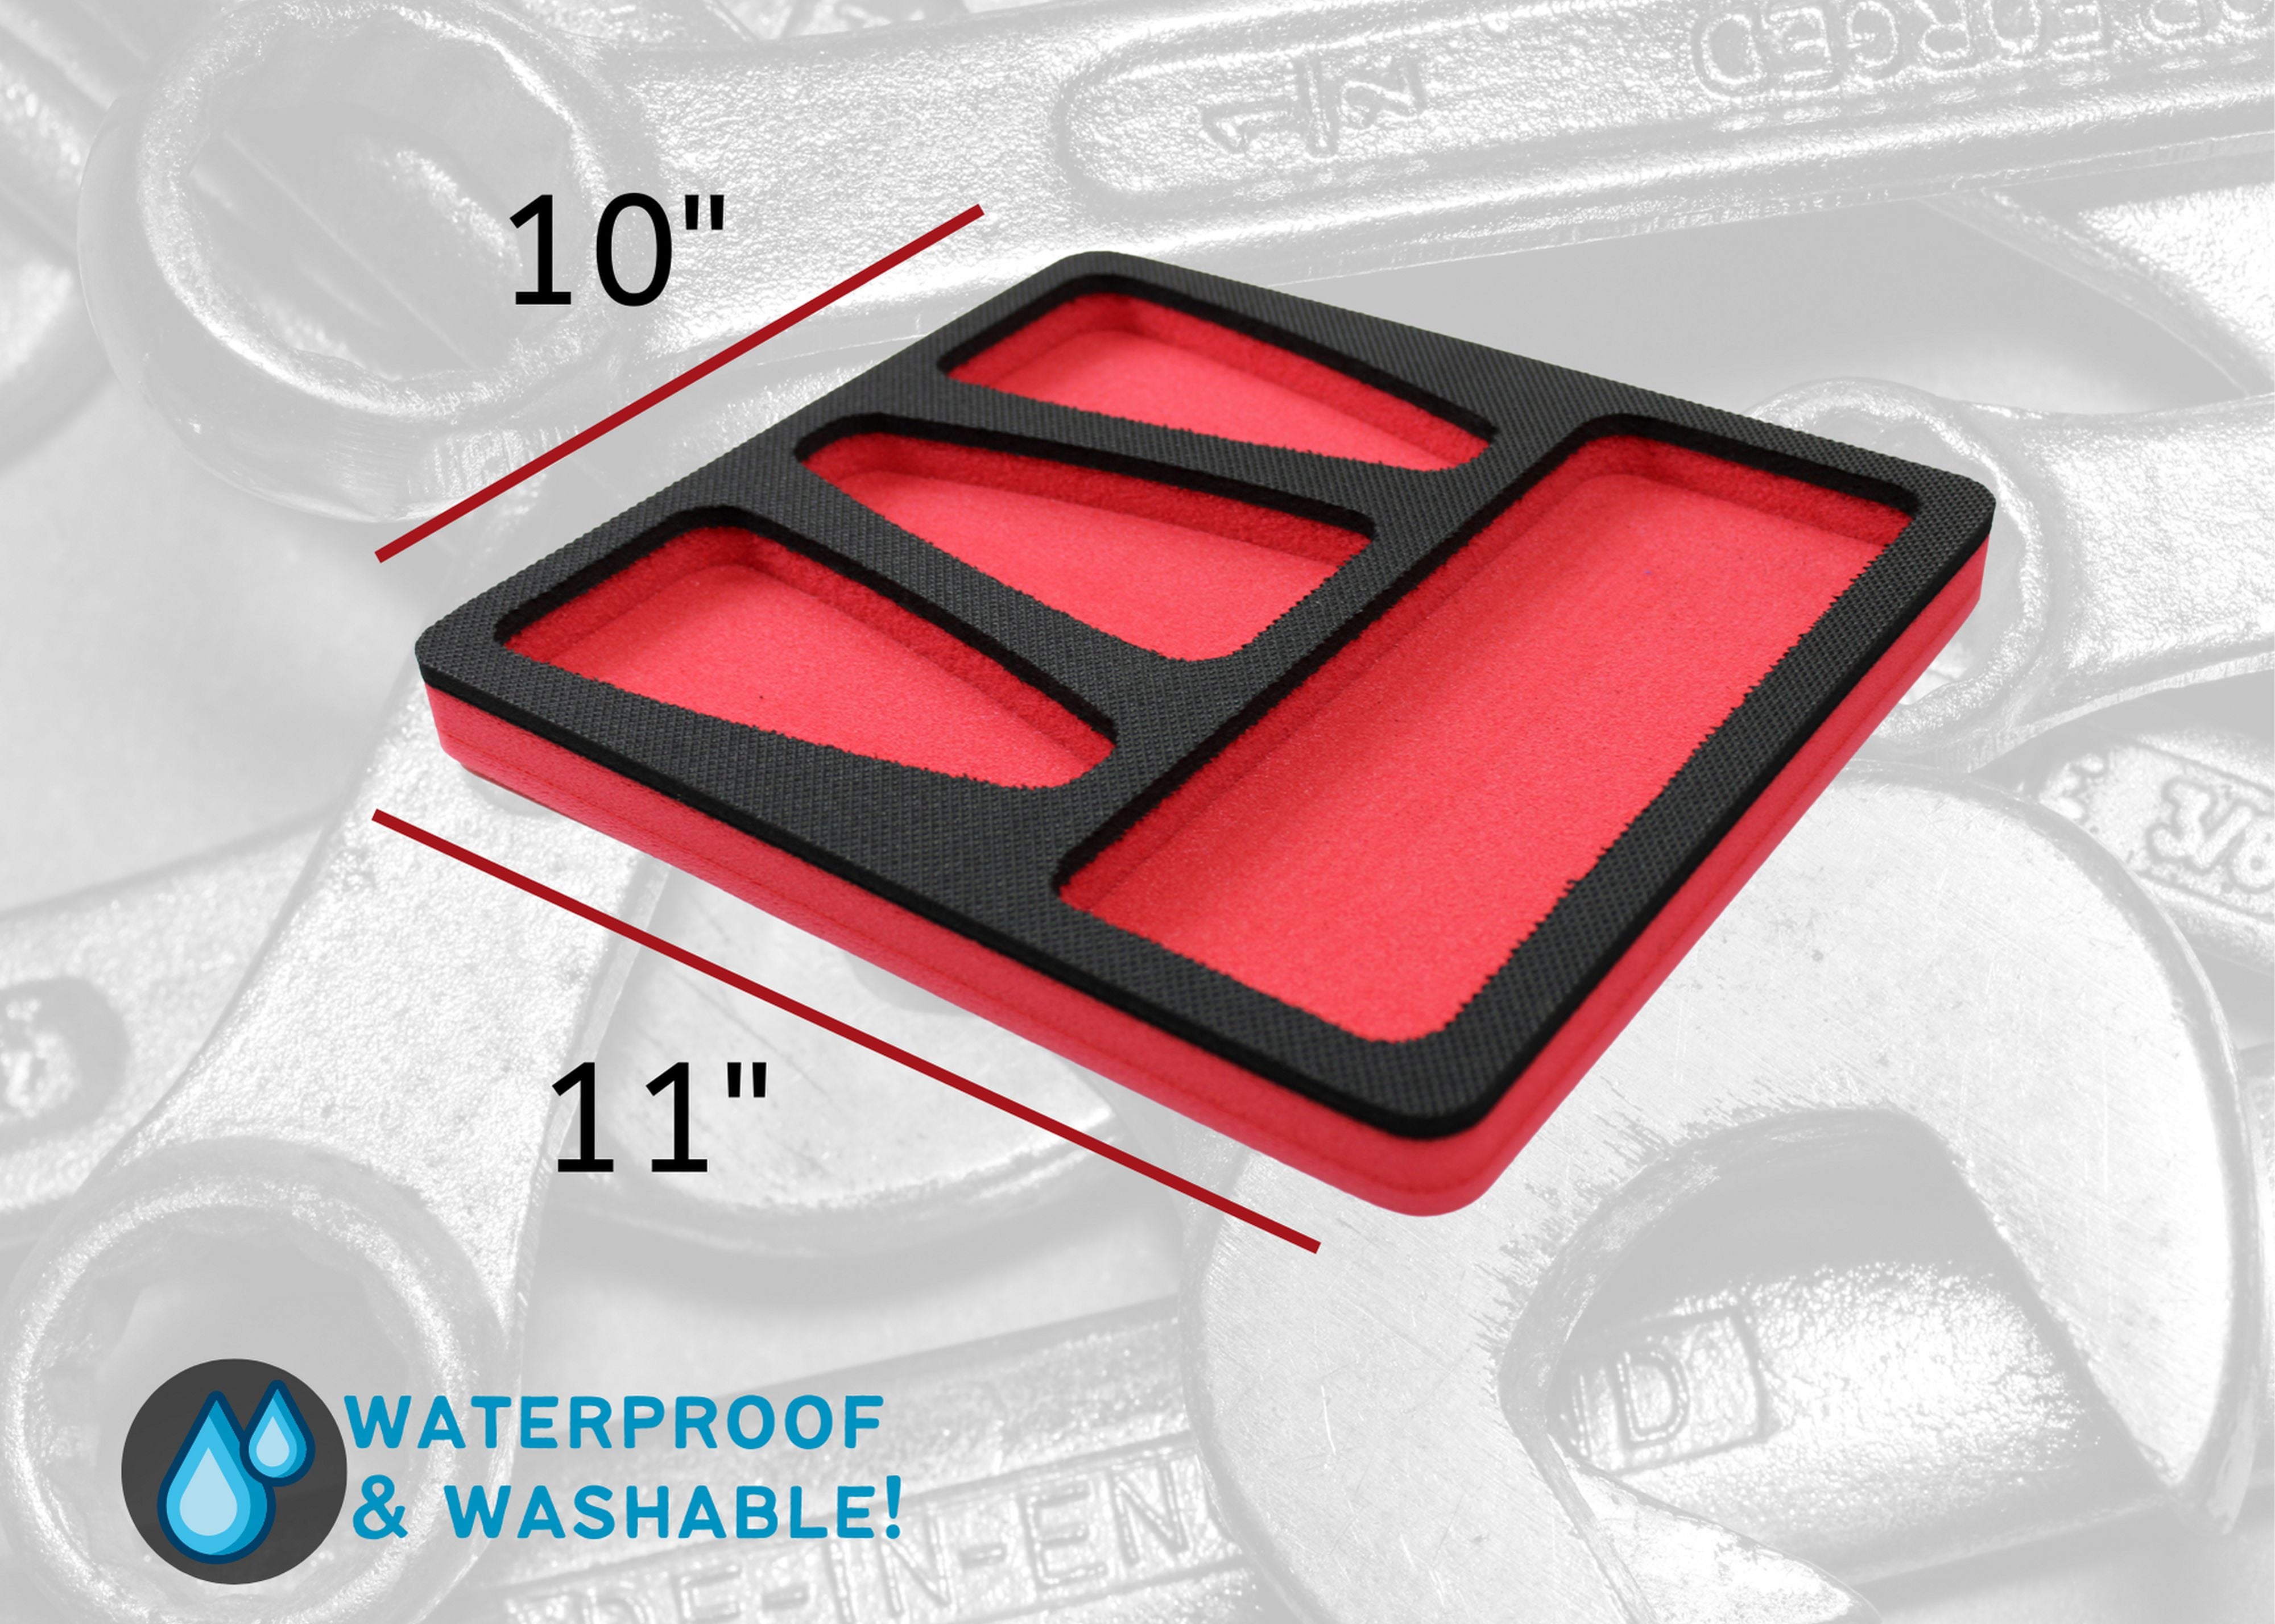 Tool Drawer Organizer Small Pliers Holder Insert Red and Black Durable Foam Tray 4 Pockets Holds 3 Small Pliers Up To 6 Inches Long Fits Craftsman Husky Kobalt Milwaukee Many Others